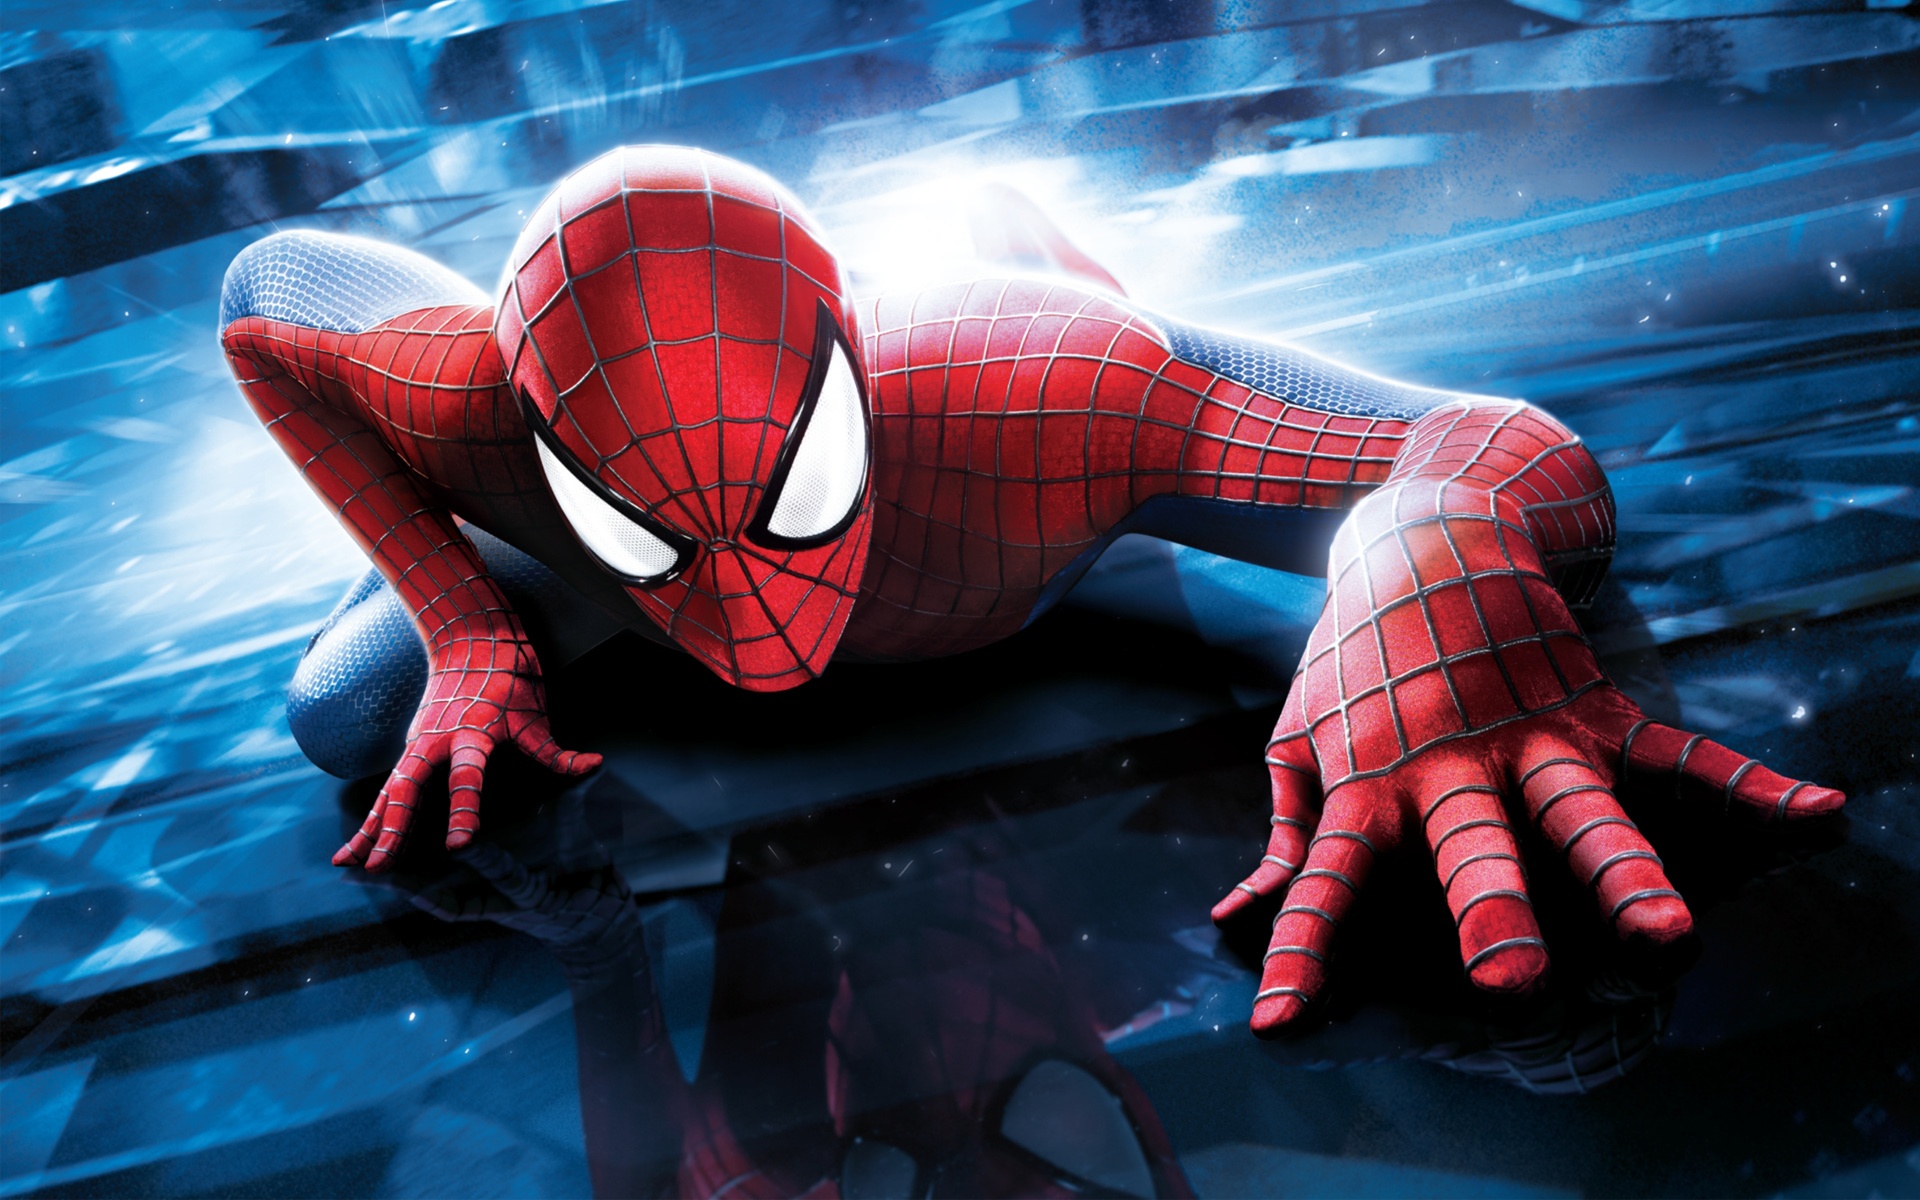 the amazing spider man 2, spider man, movie wallpaper for mobile